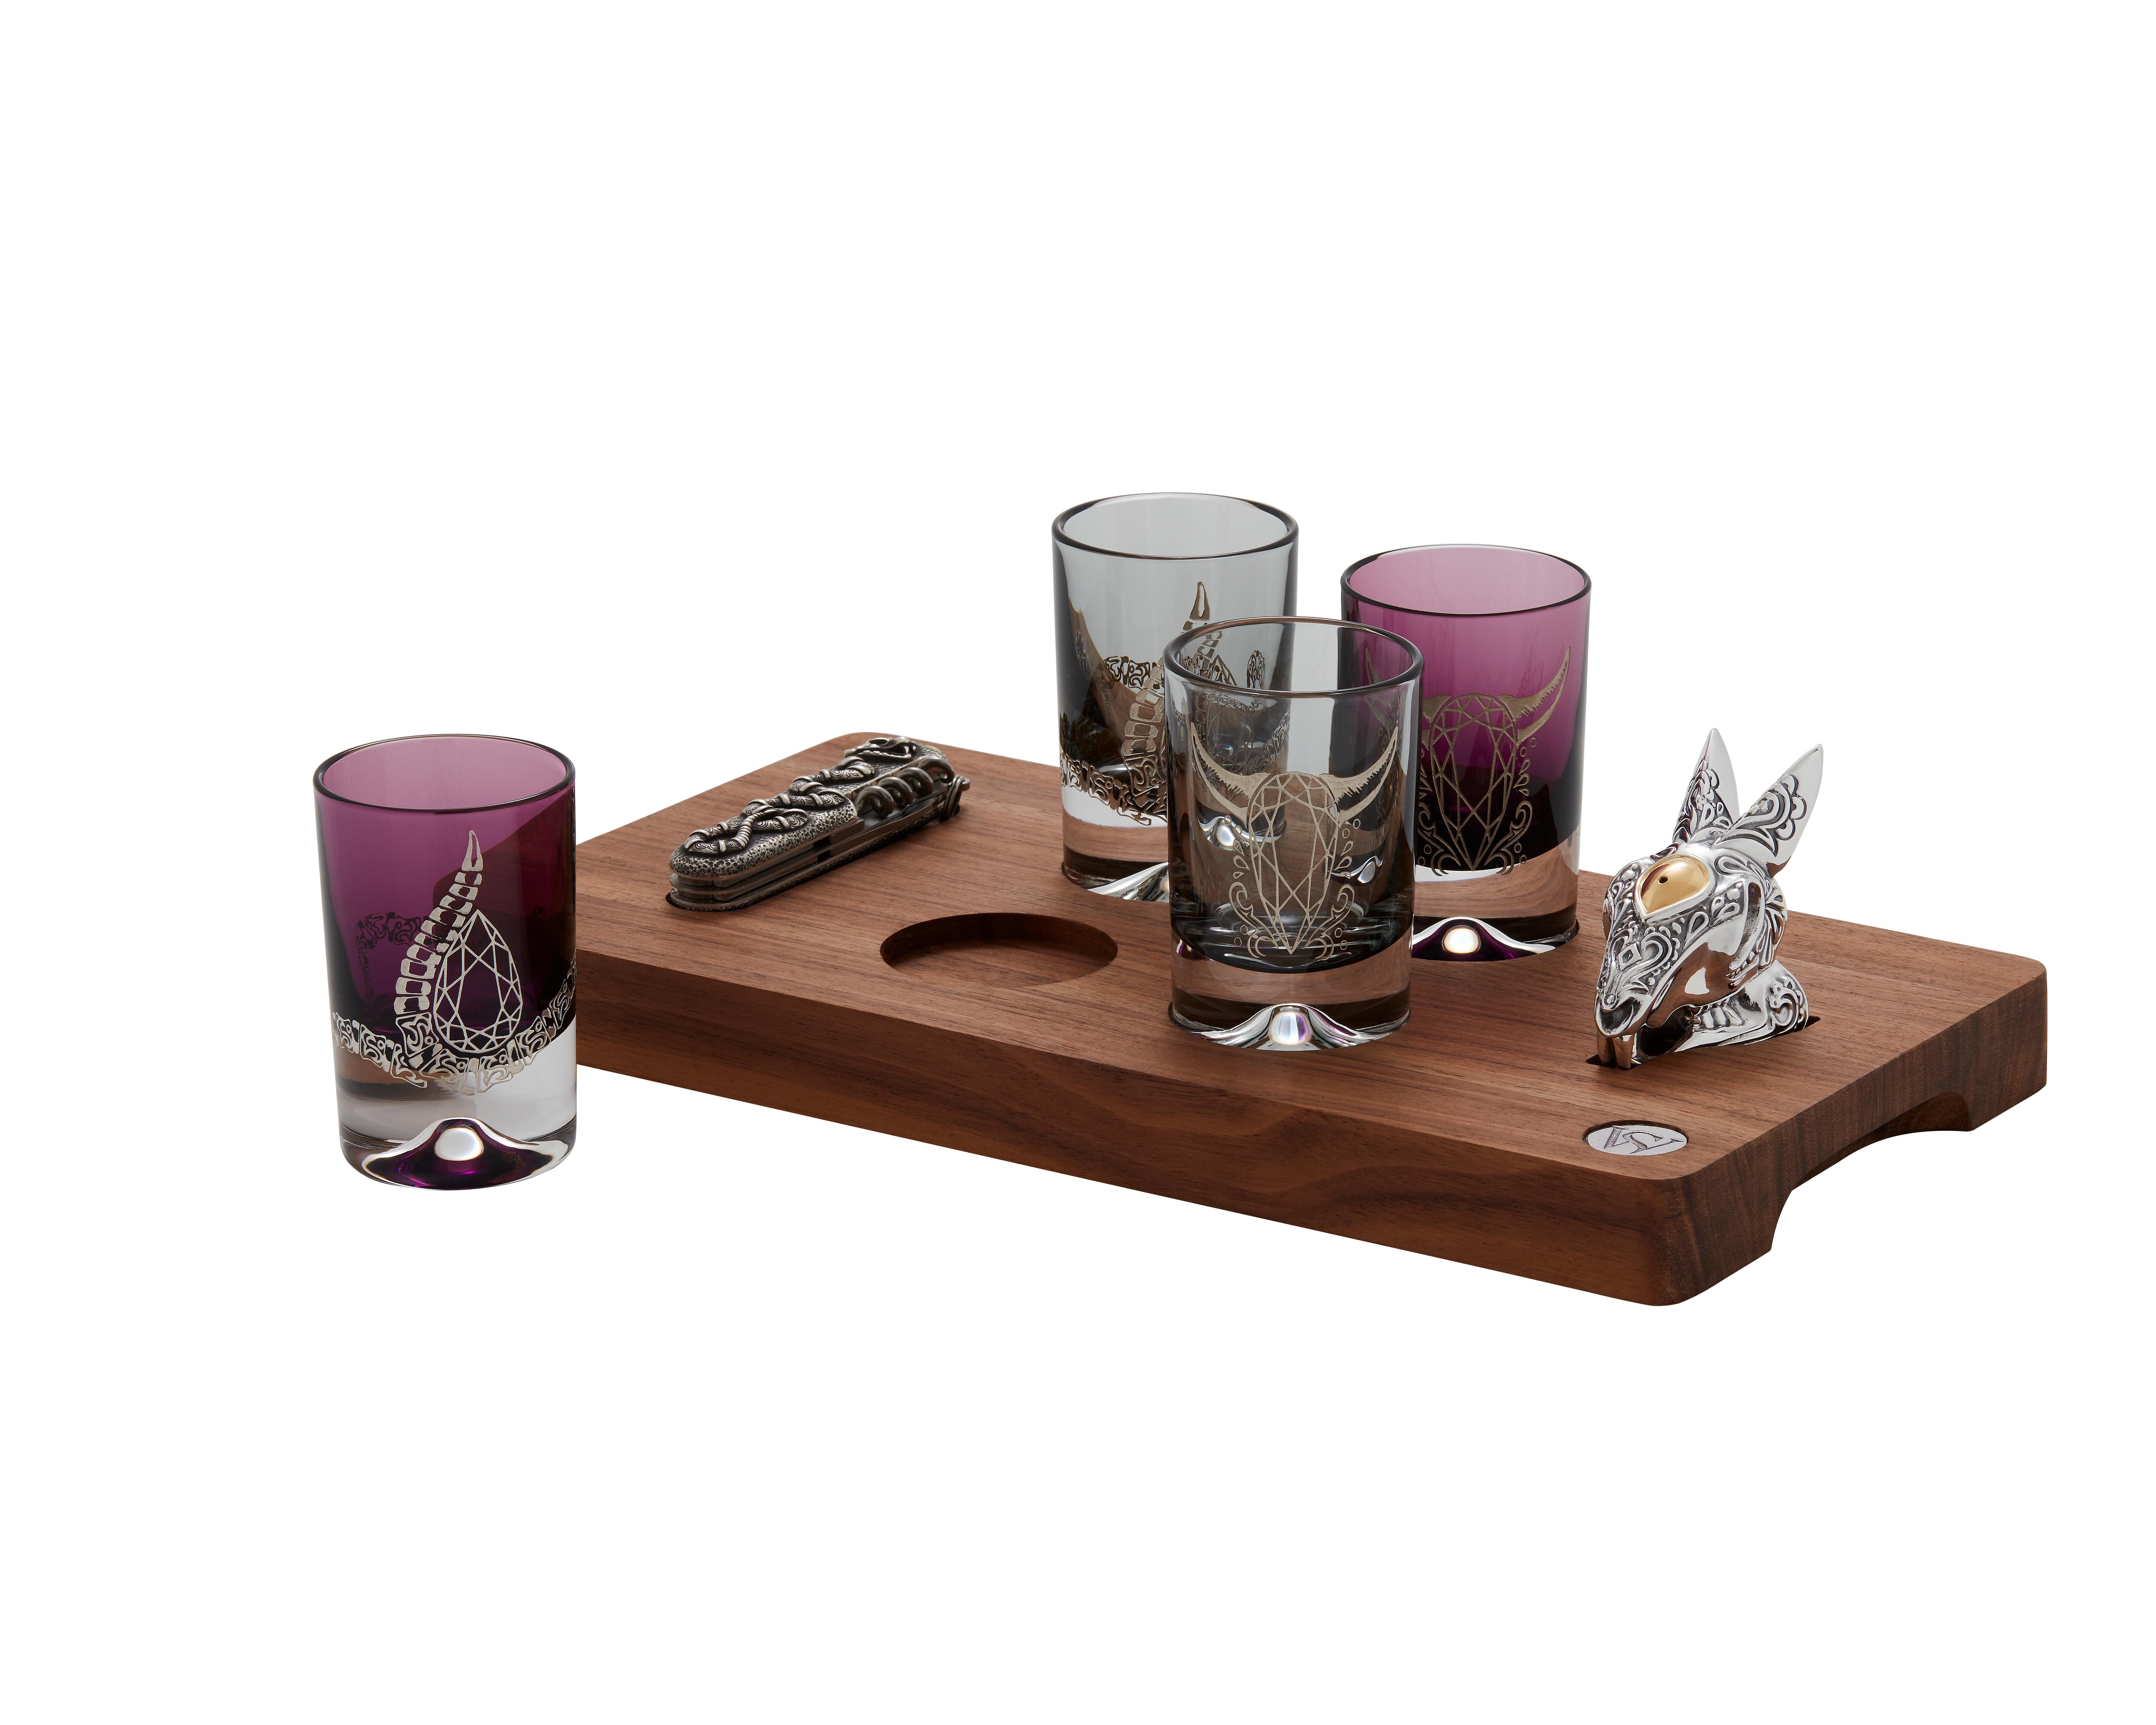 This Tequila Glass set includes:
1 x Tequila Cow Shot Glass - Smoke coloured glass with engraved cow detail
1 x Tequila Cow Shot Glass - Amethyst coloured glass with engraved cow detail
1 x Tequila Rattlesnake Shot Glass - Smoke coloured glass with